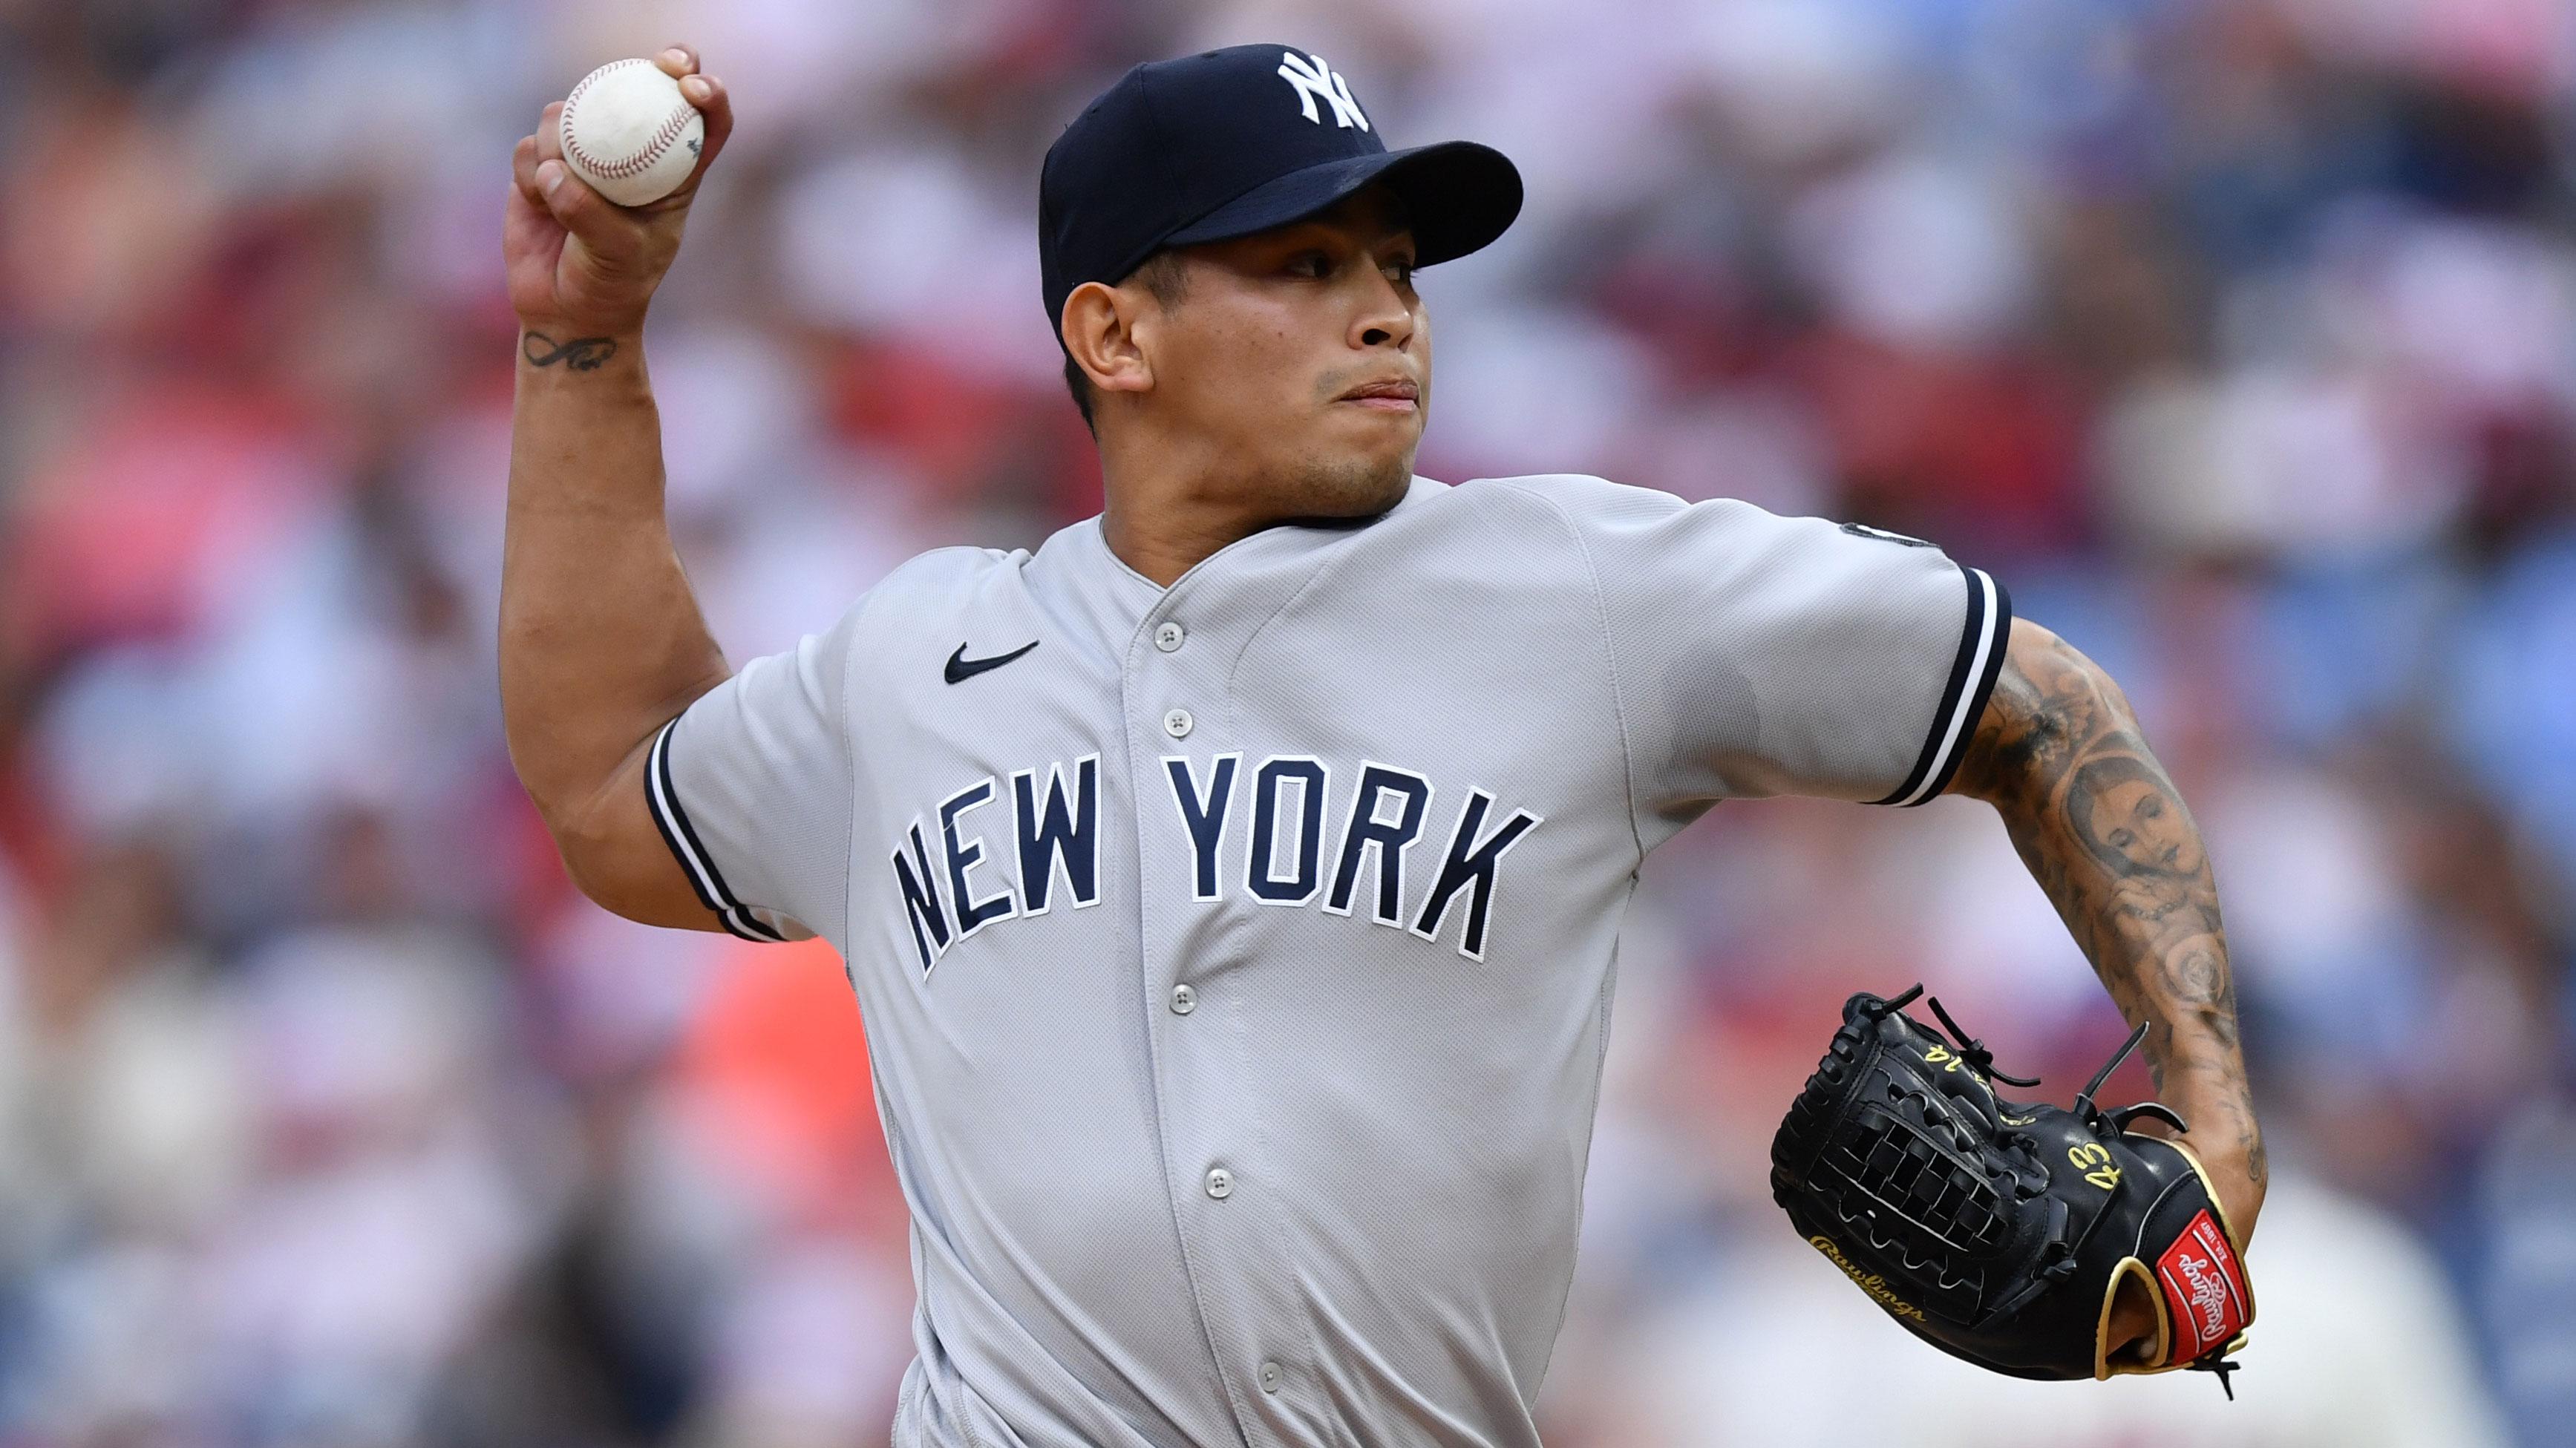 Jun 13, 2021; Philadelphia, Pennsylvania, USA; New York Yankees pitcher Jonathan Loaisiga (43) throws a pitch in the eighth inning against the Philadelphia Phillies at Citizens Bank Park. / Kyle Ross-USA TODAY Sports